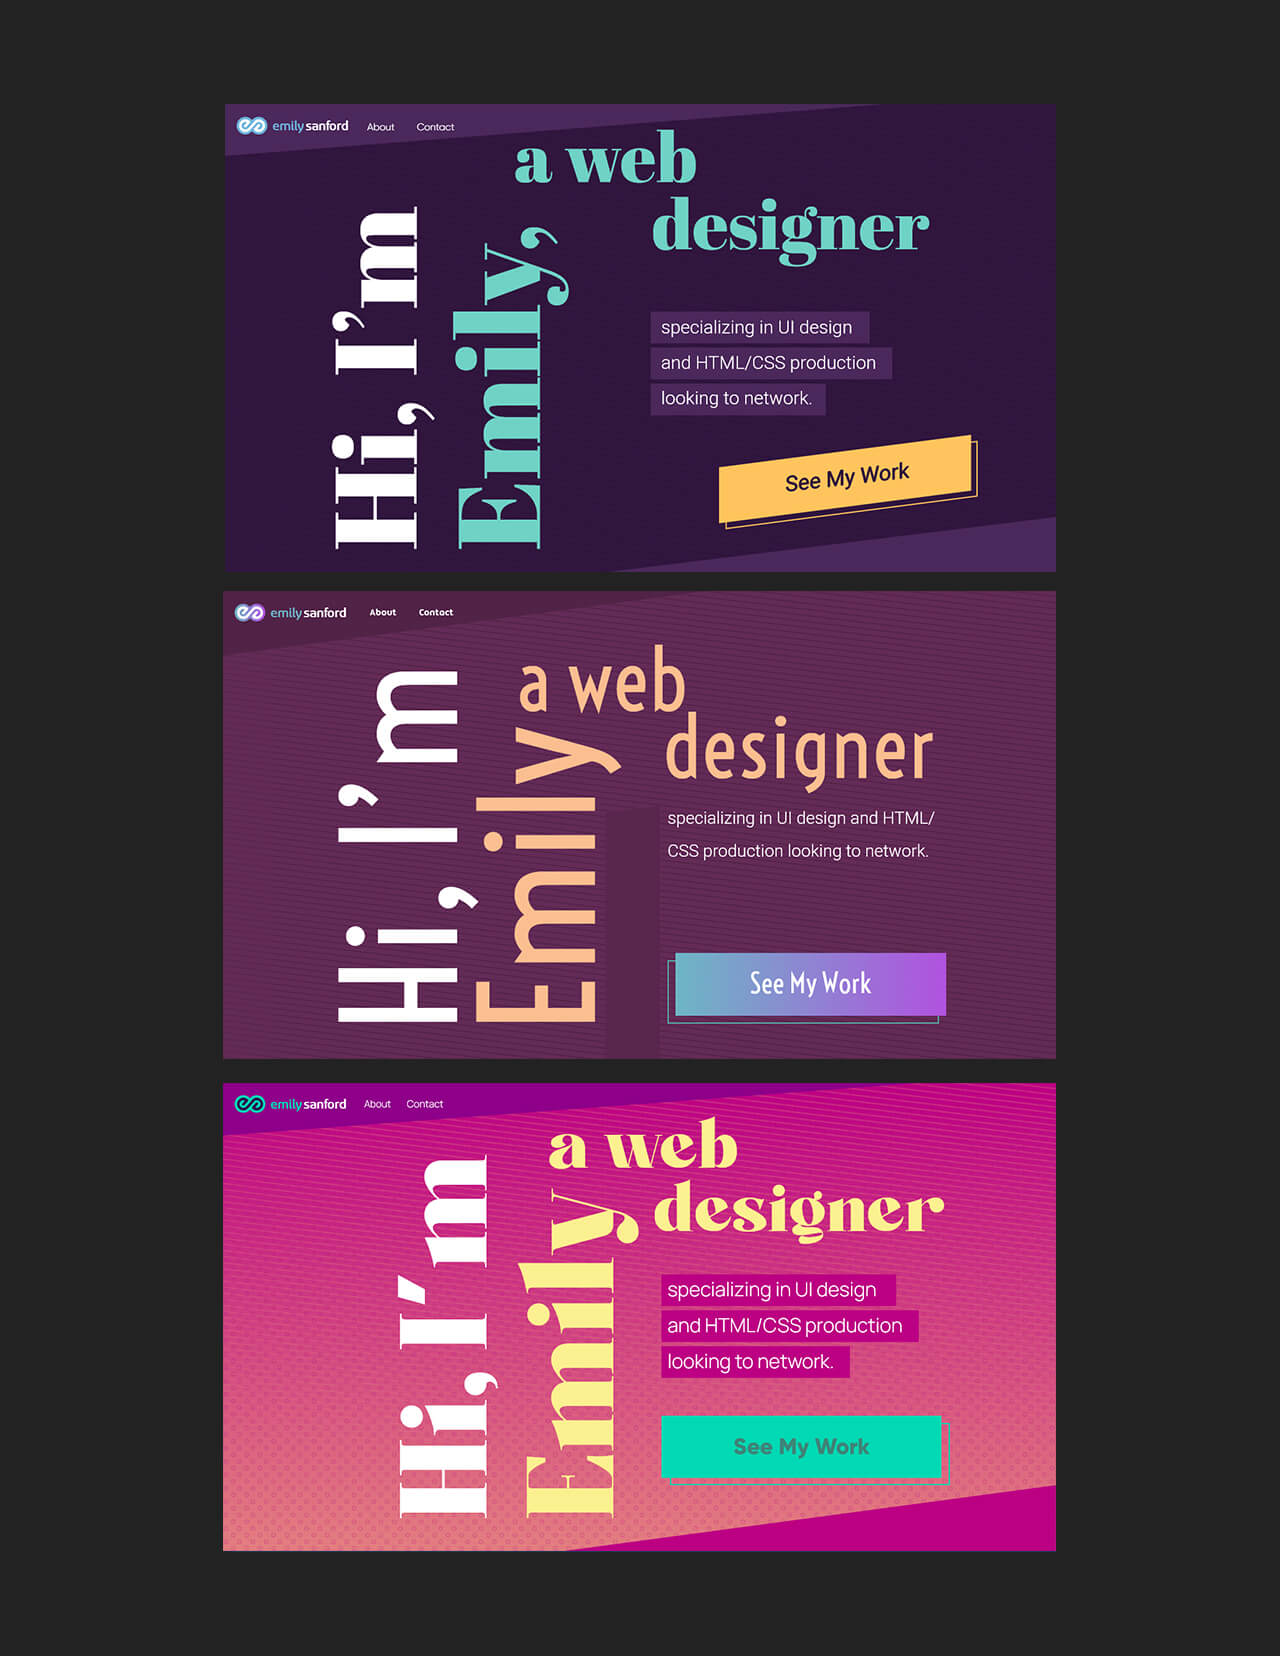 Three mockup variations of the third wireframe from the previous graphic. They use different fonts, colors, patterns, and graphical flourishes.